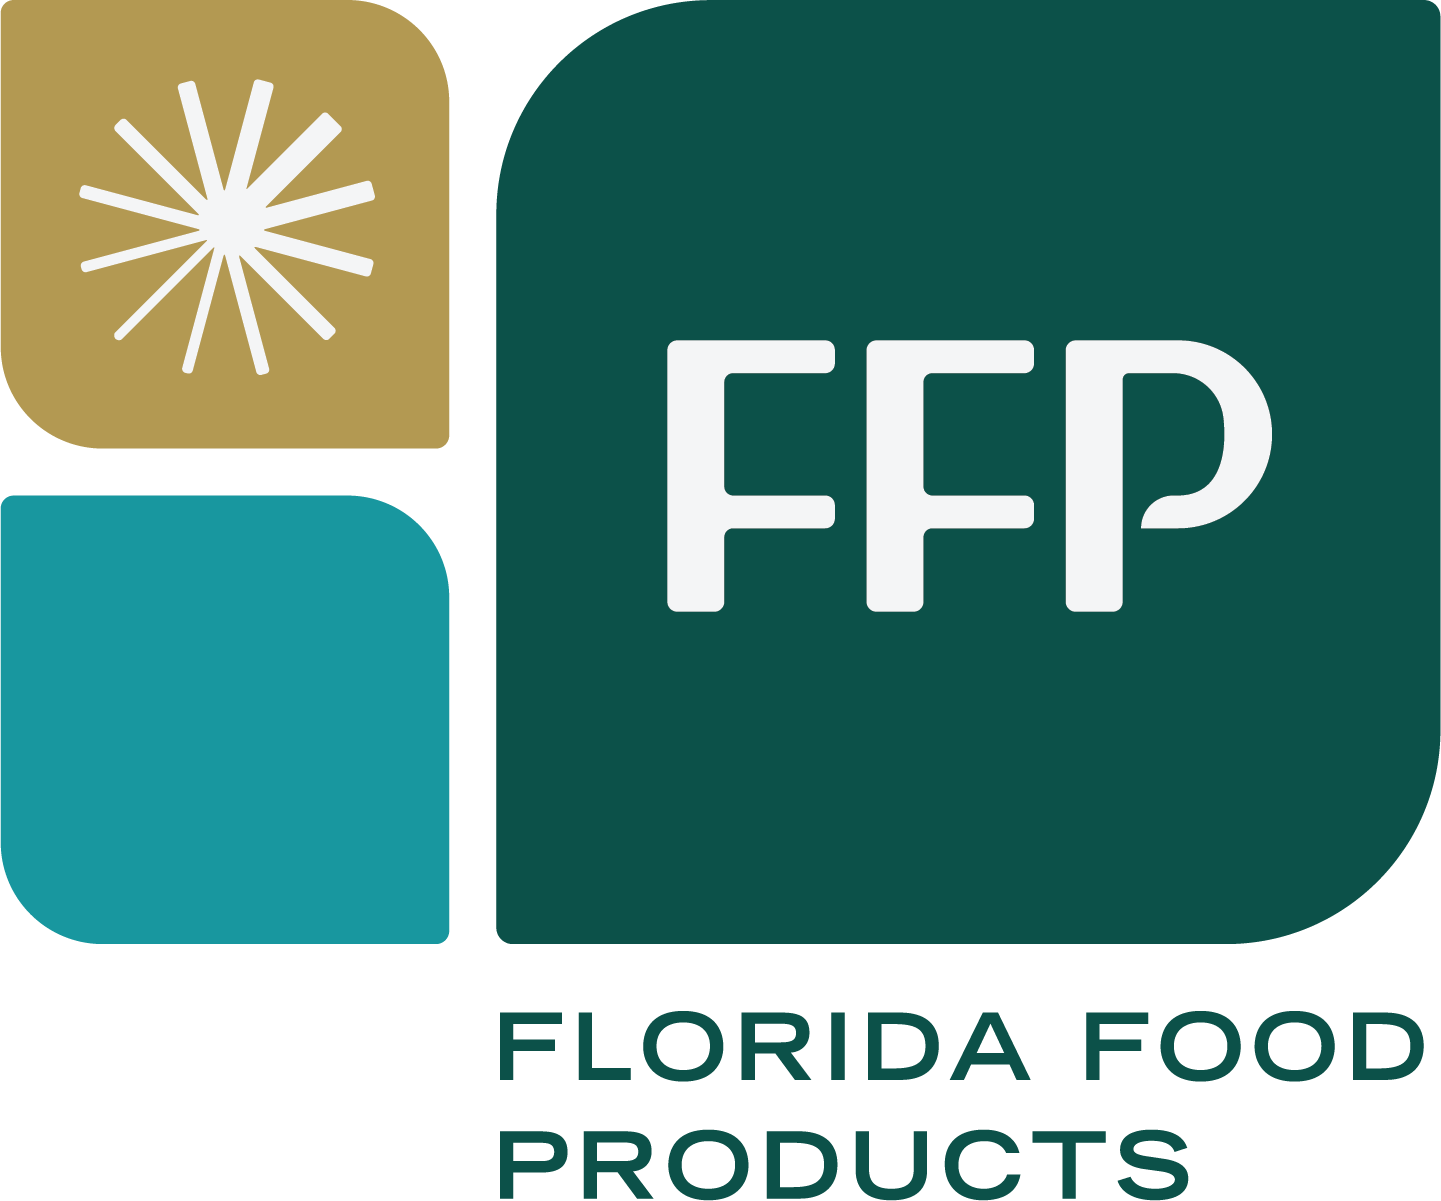 FFP Invests in T-Bev, Expanding Platform into Nutraceutical Ingredients While Strengthening Presence in Value Added, Natural Tea Products